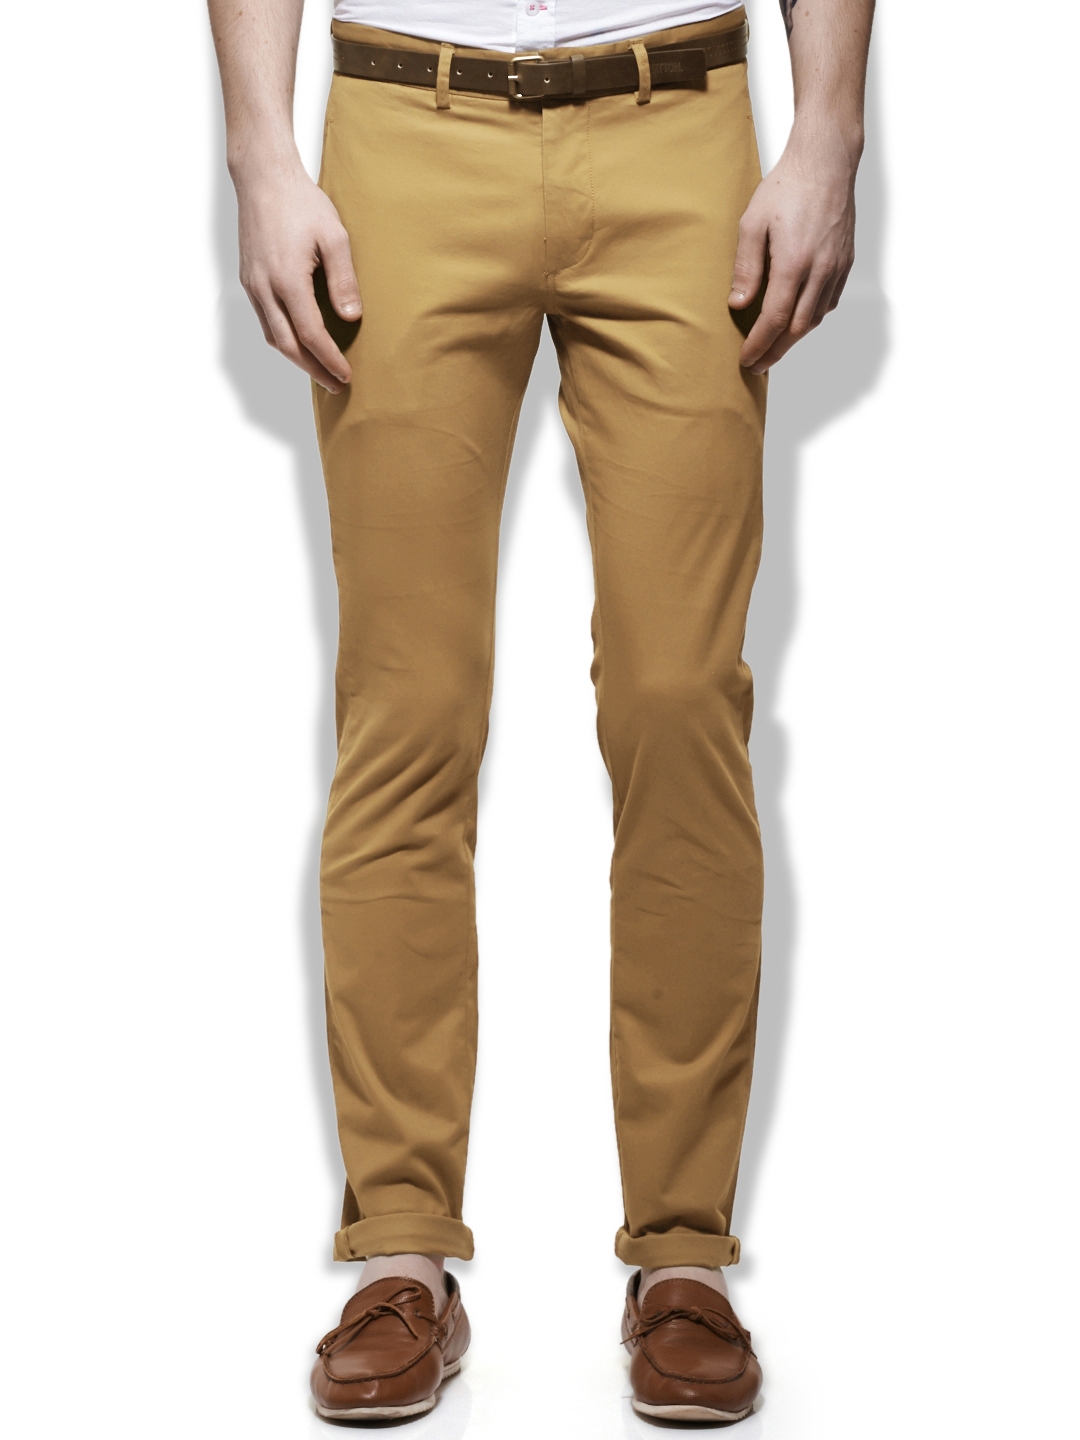 Buy UNITED COLORS OF BENETTON Solid Cotton Lycra Slim Fit Men's Trousers